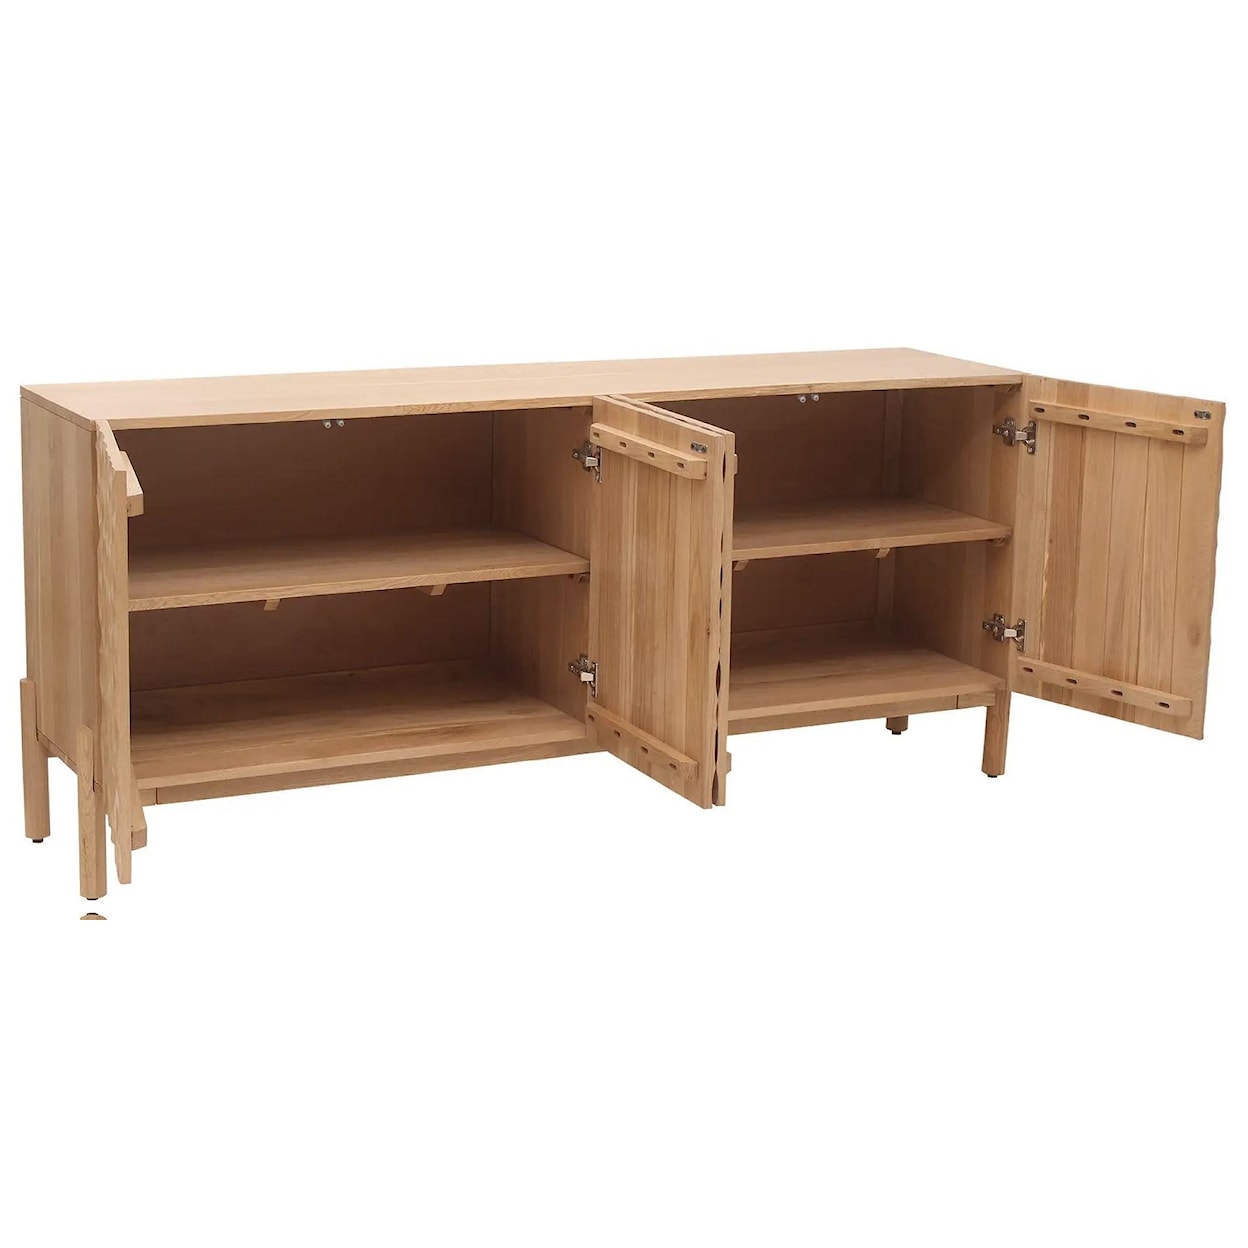 Moe's Home Collection MISAKI Sideboard